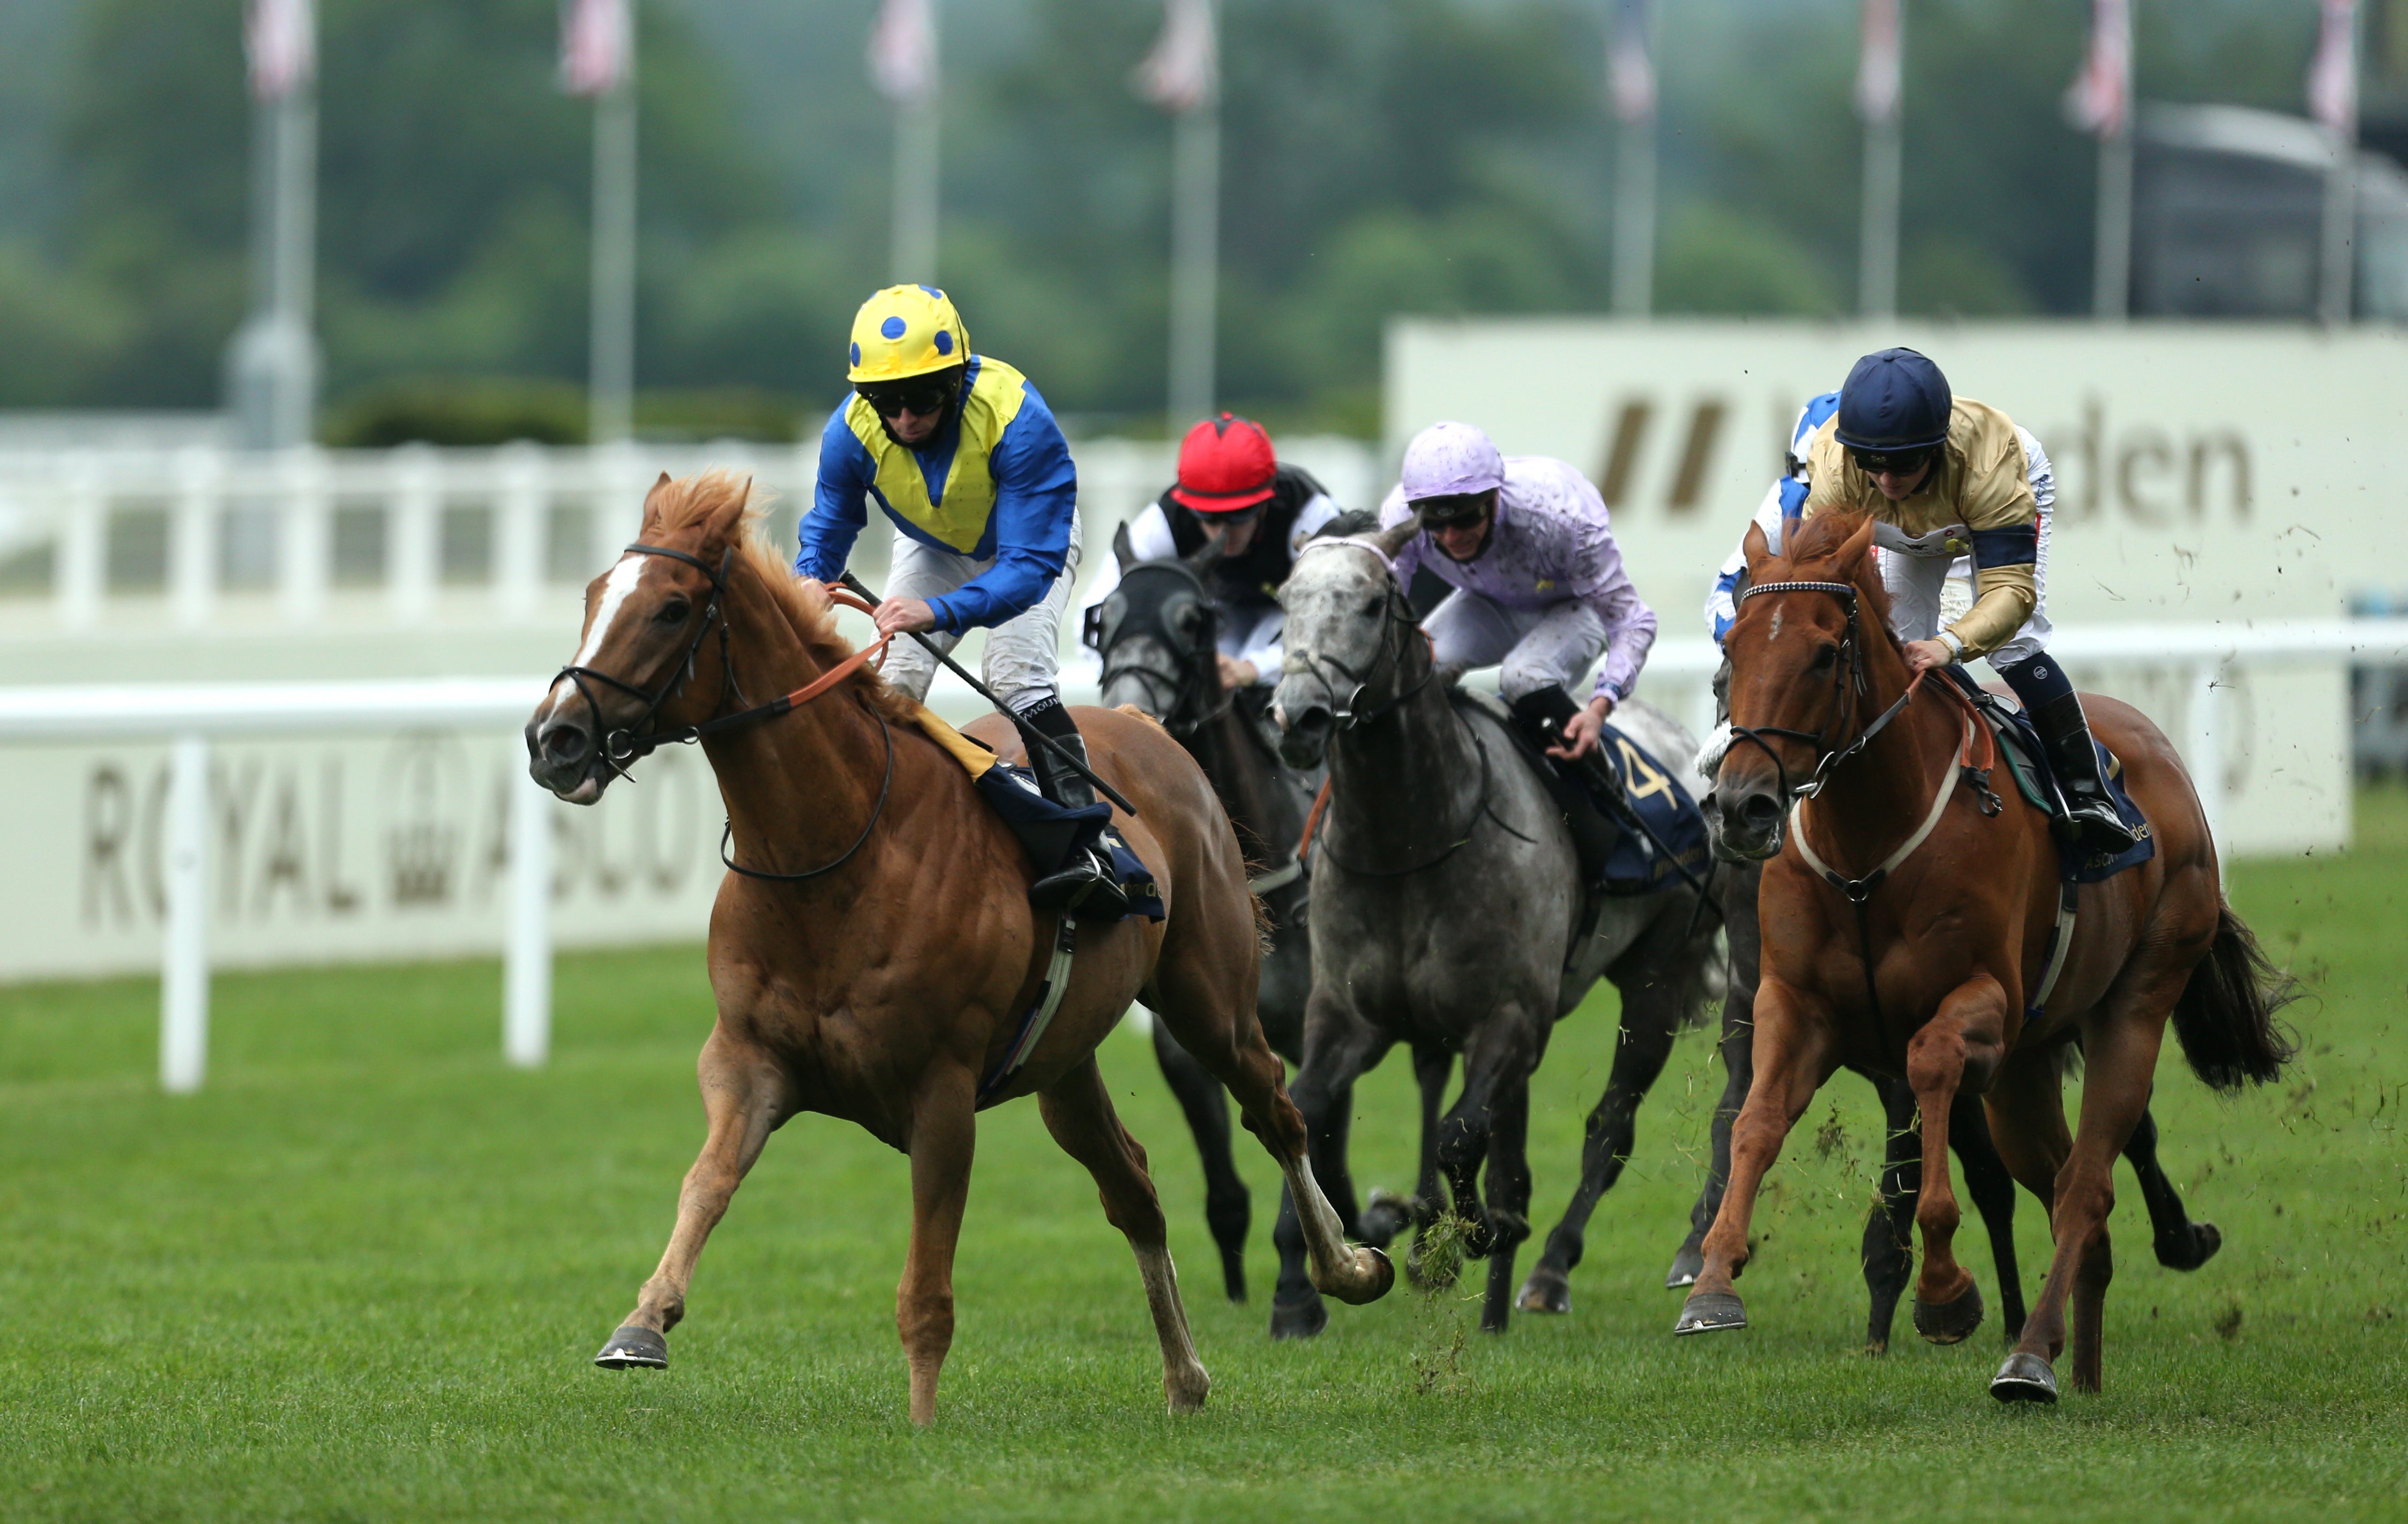 Dream Of Dreams ridden by Ryan Moore on their way to winning the Diamond Jubilee Stakes at Ascot